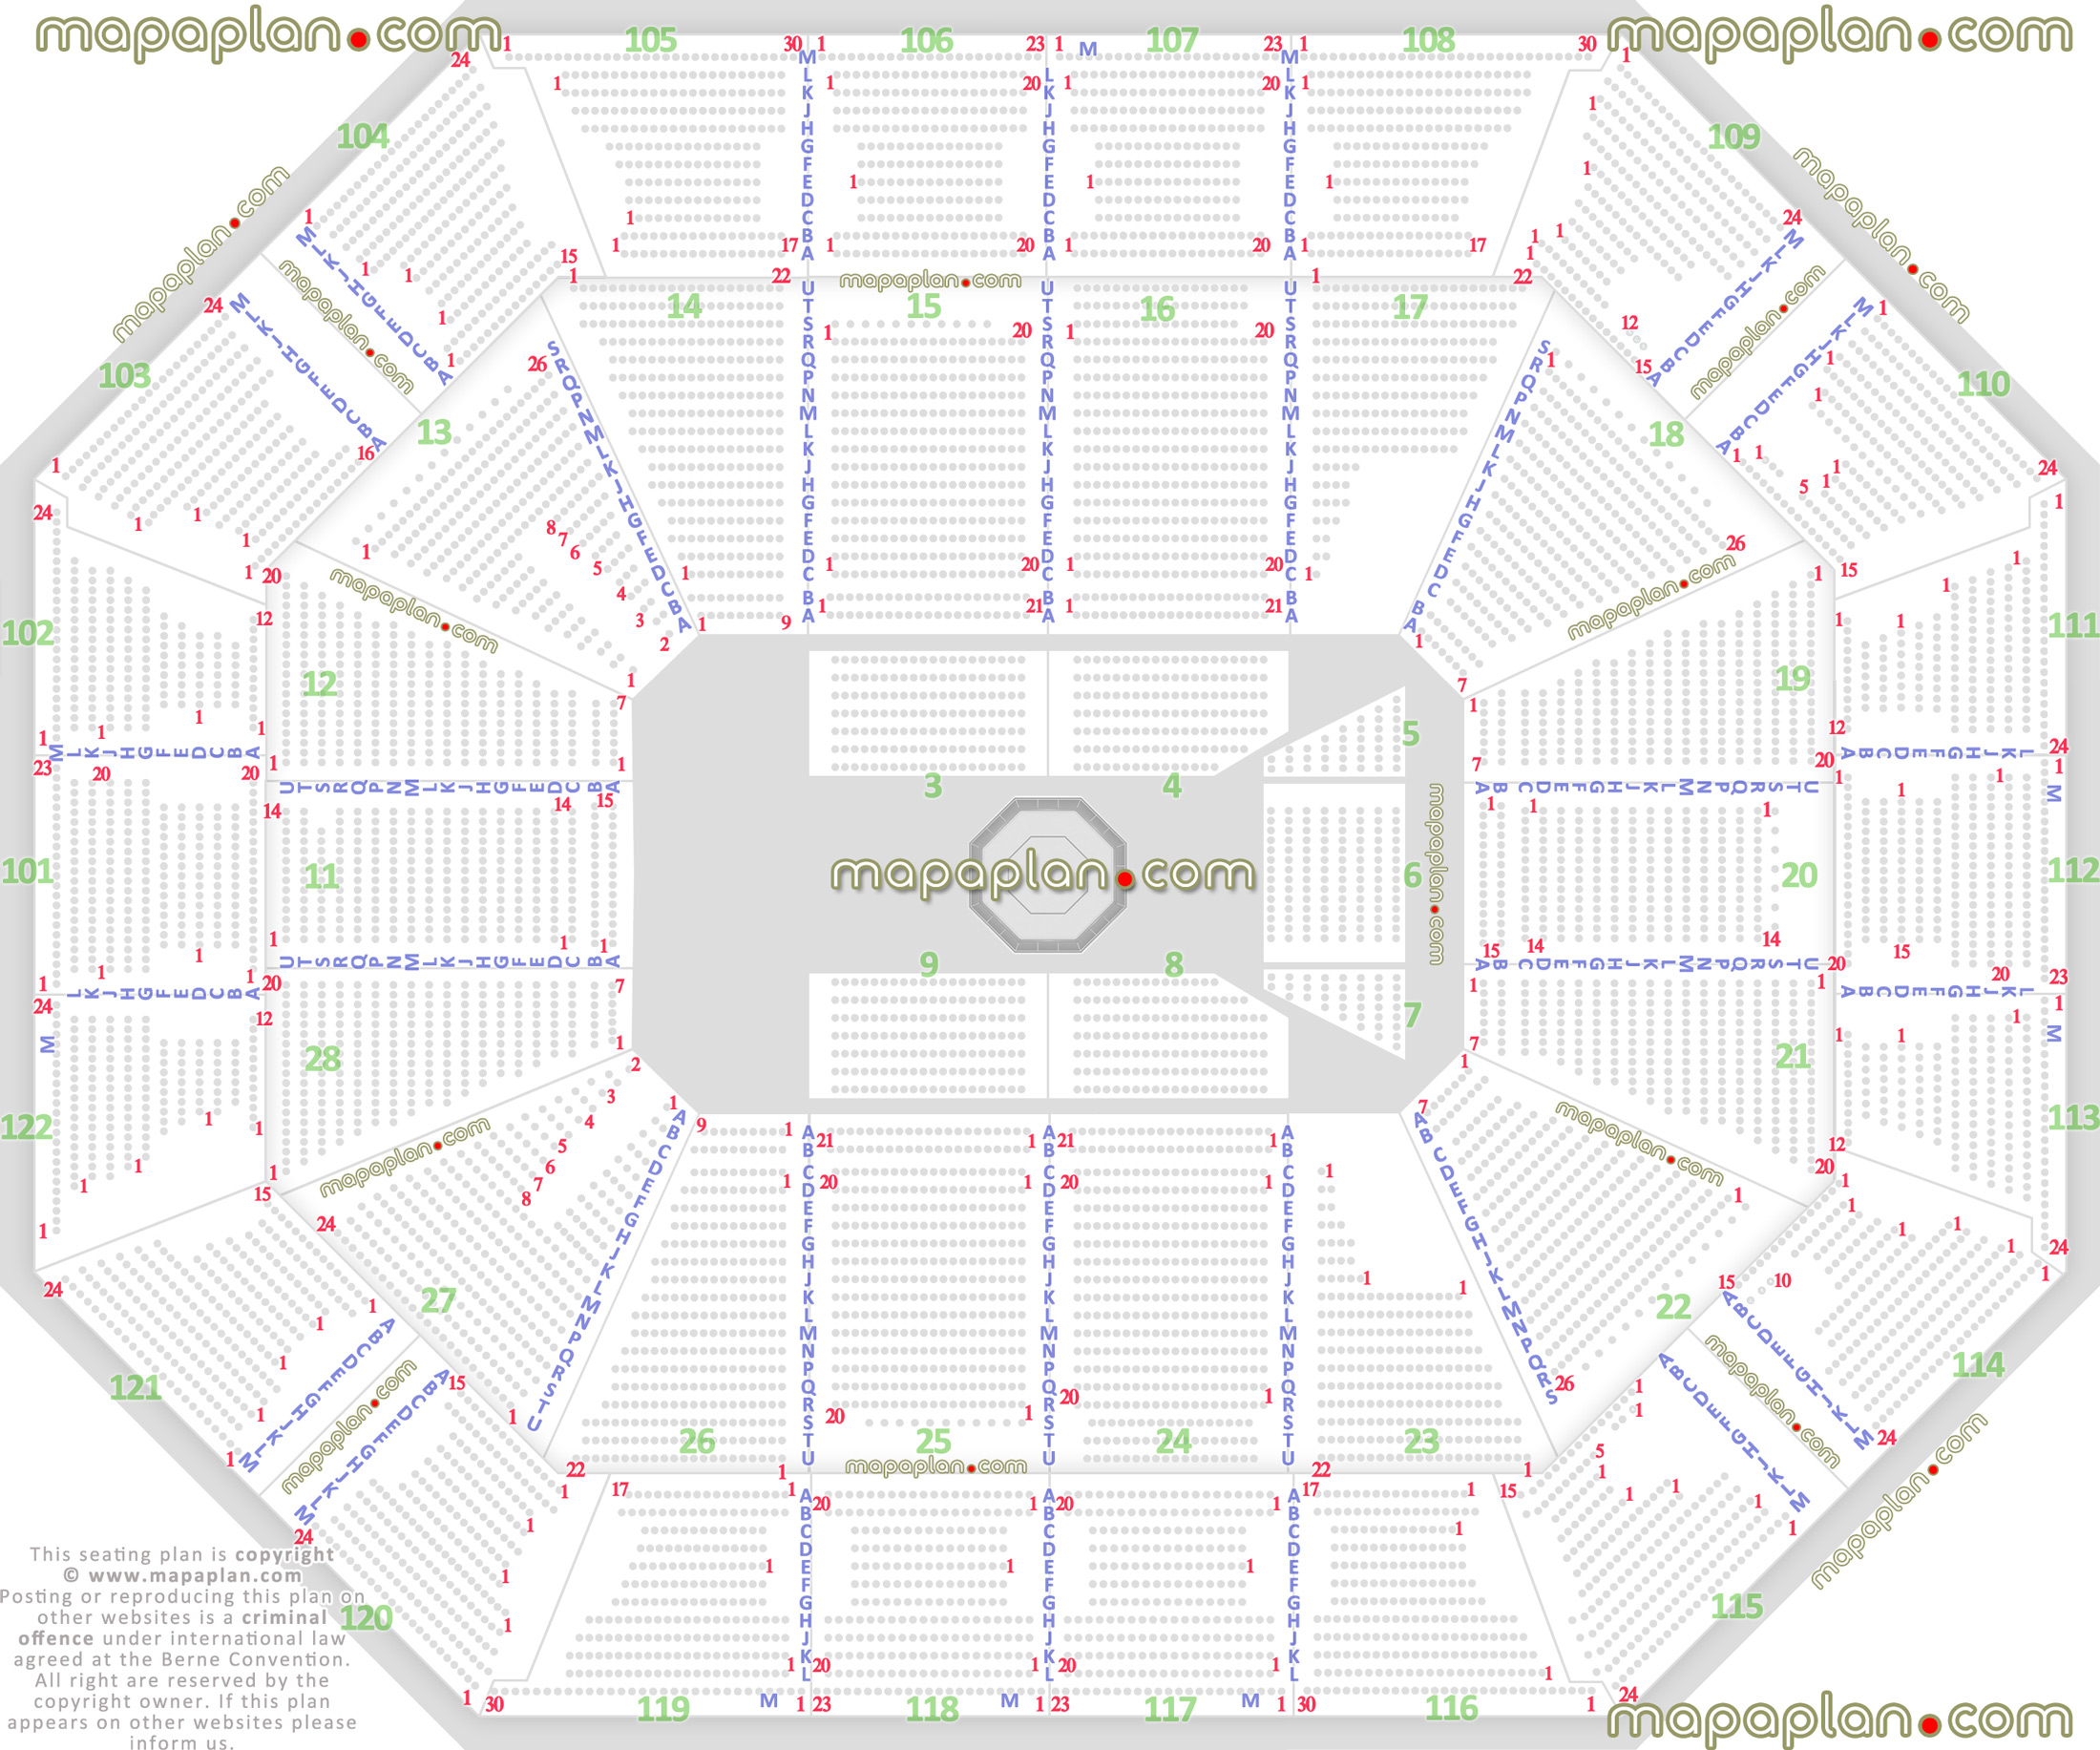 Mohegan Sun Arena - UFC MMA fights & boxing match events ...